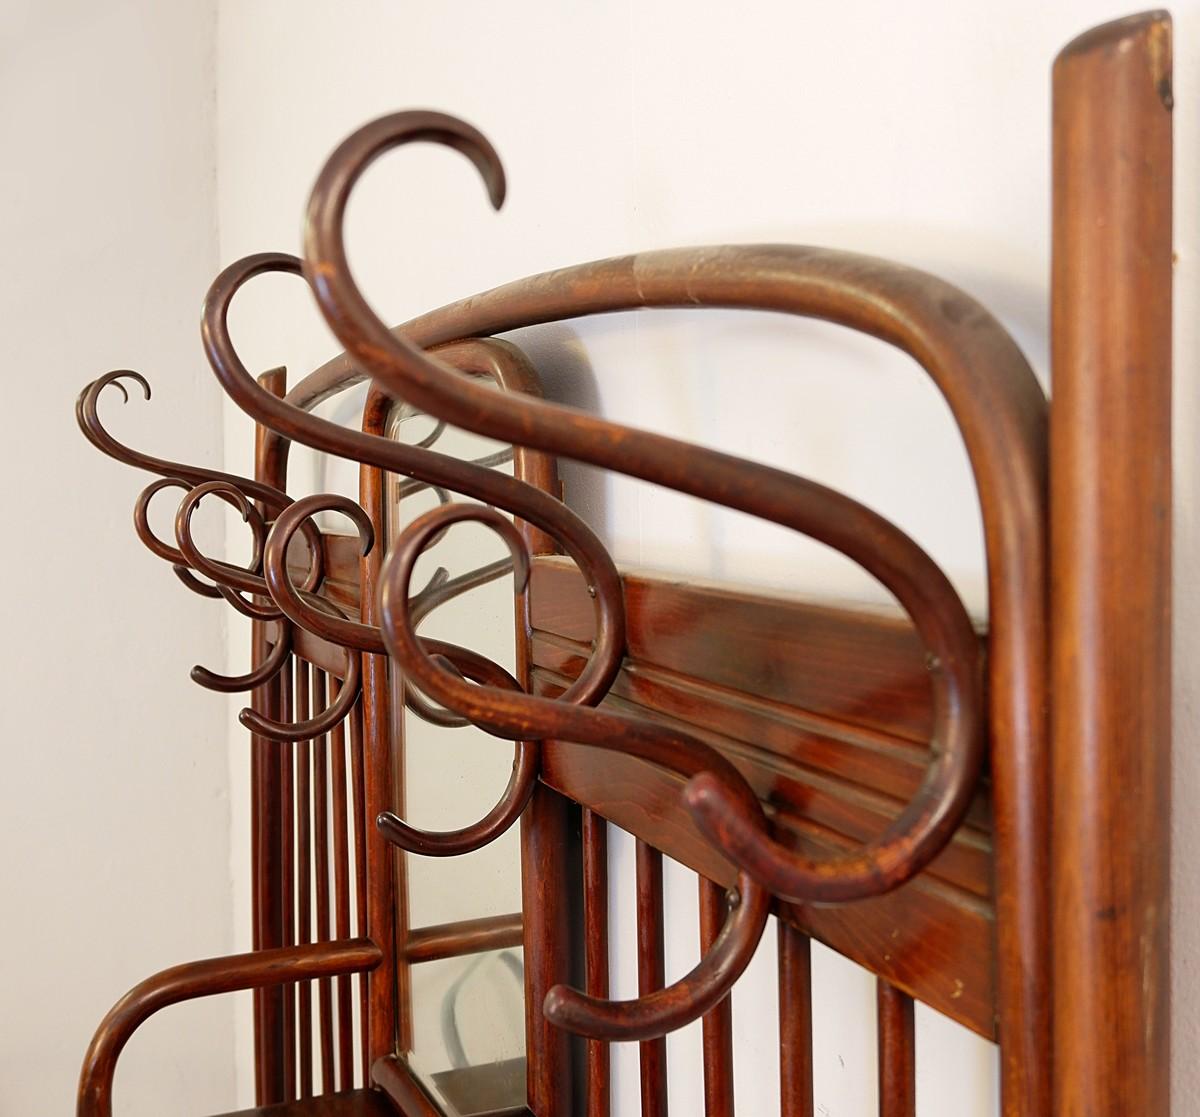 Wood Thonet Art Nouveau Wall Mounted Coat Rack Model 6 Mahogany Stained, Vienna